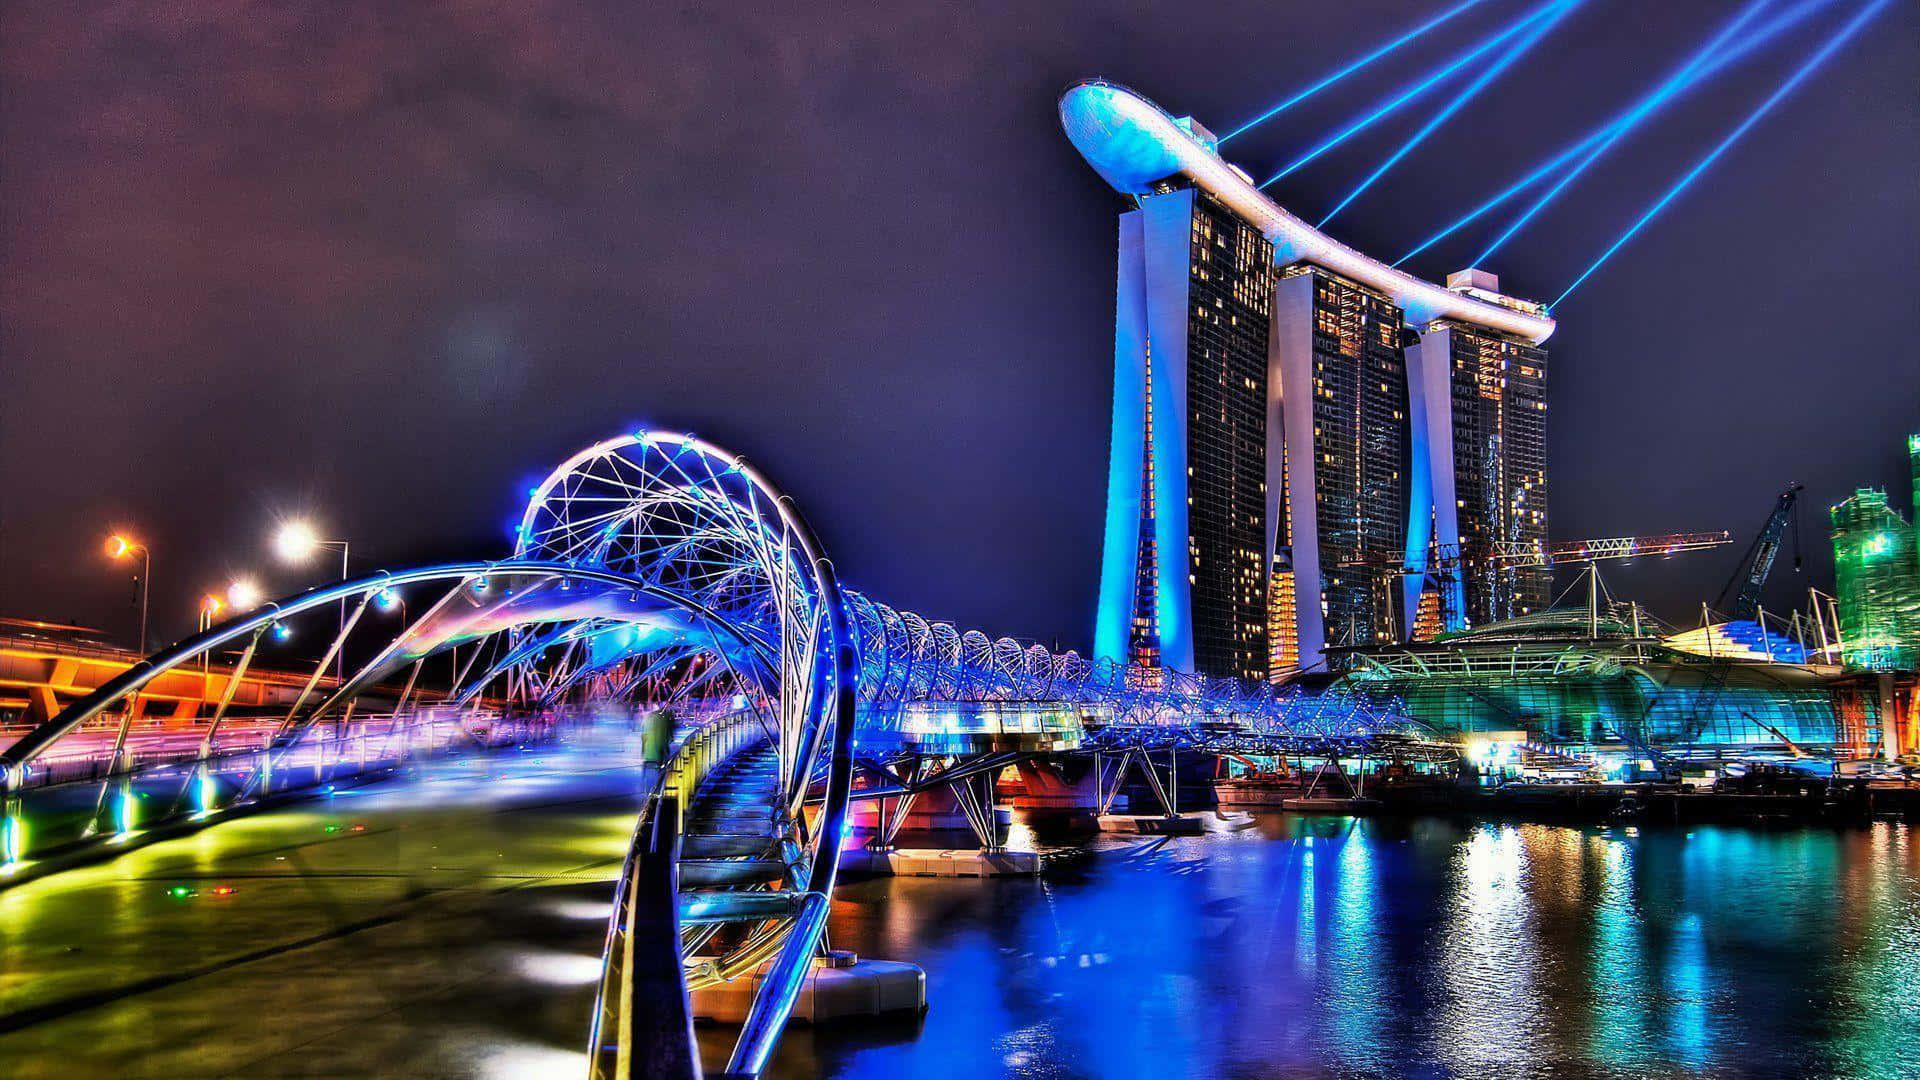 Spectacular view of Marina Bay Sands during blurry sunset, Singapore